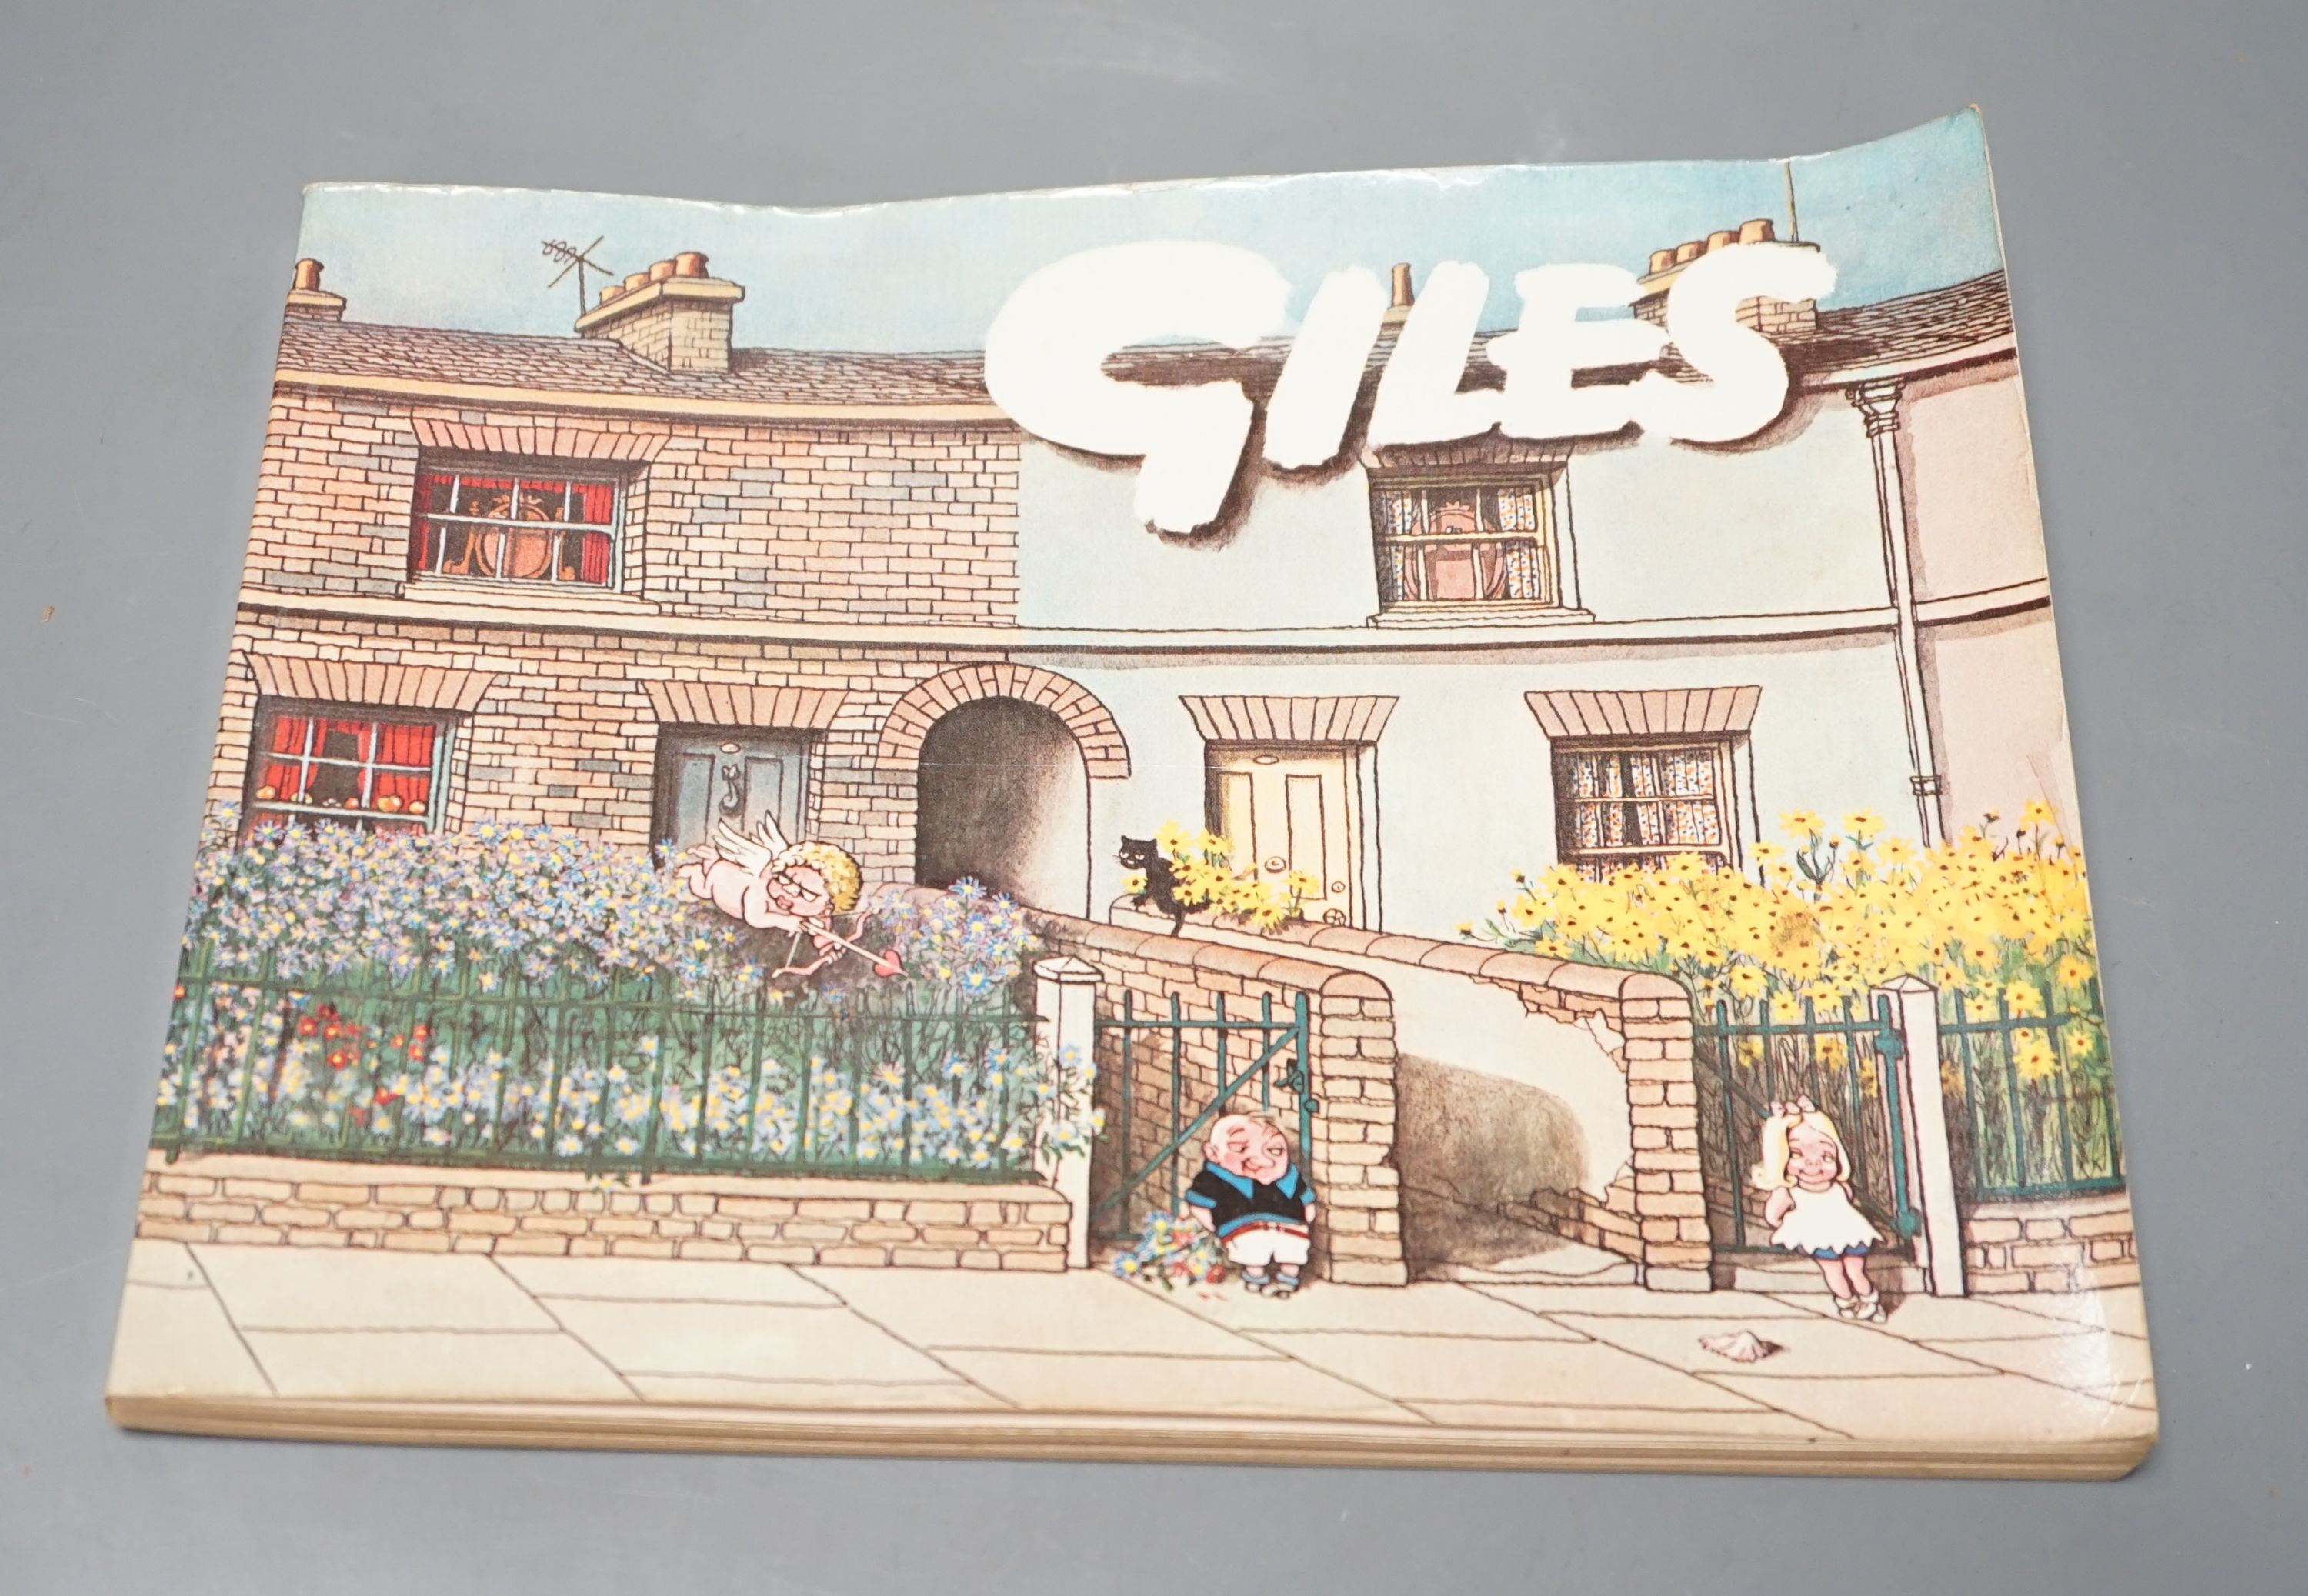 Giles, Carl - A rare complete set of Daily Express and Sunday Express Cartoons, 1st-49th series, with commemorative issues 50-52, 56 and 57, together with - Tory, Peter - Giles: A Life in Cartoons, London, 1992 (2 copies